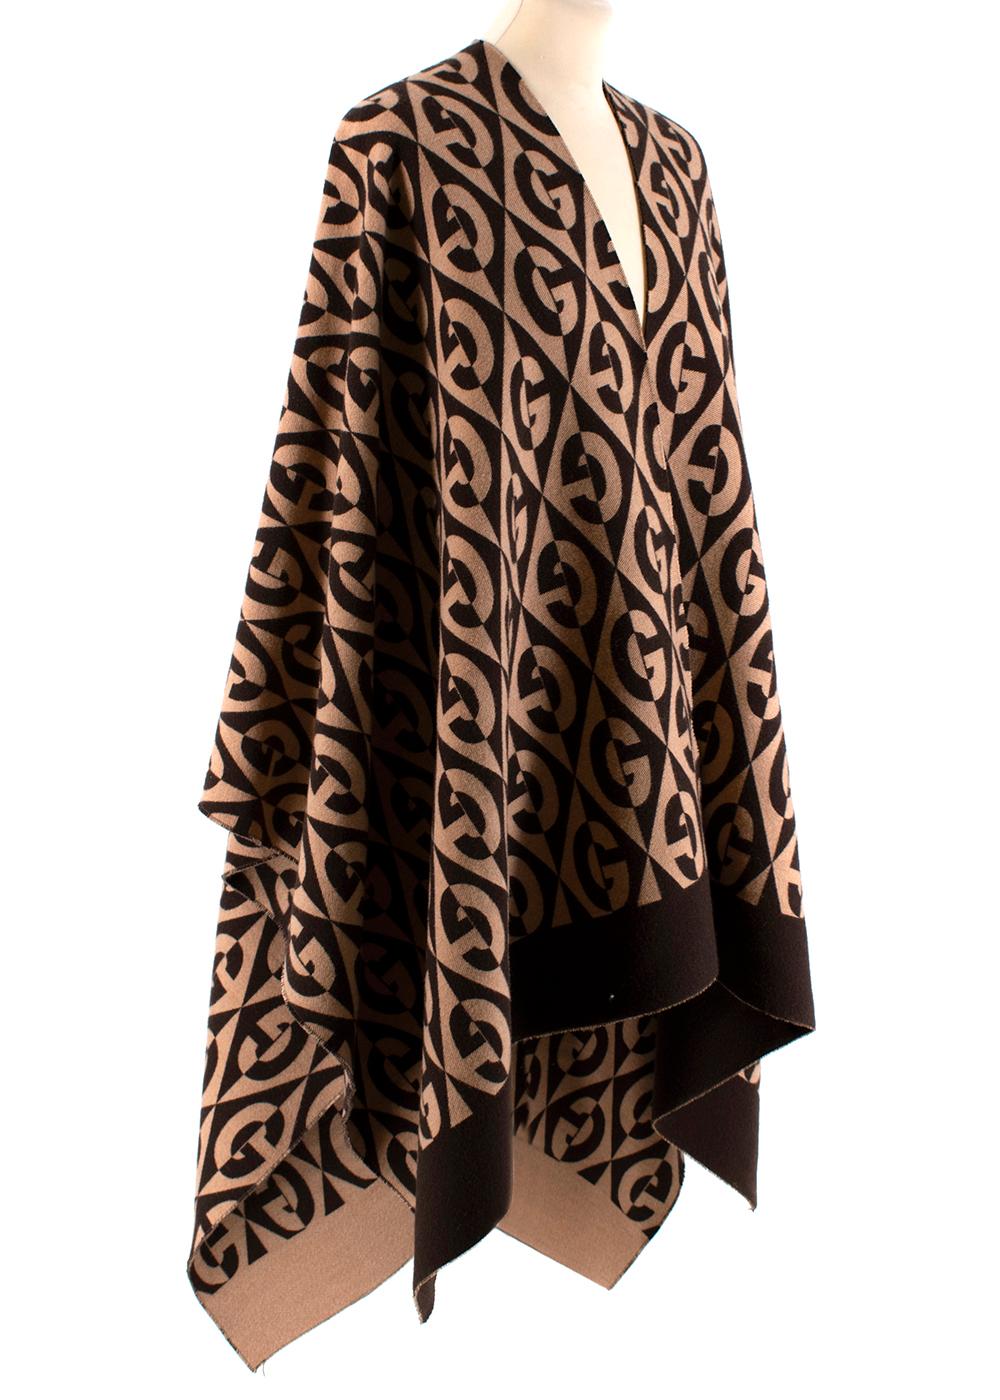 Gucci Brown G Rhombus Poncho

-Dark and Light Brown
- 91% Wool 
- 9% Cotton 
- Very Soft 
- G logo 
- Reversible 

PLEASE NOTE, THESE ITEMS ARE PRE-OWNED AND MAY SHOW SIGNS  OF BEING STORED EVEN WHEN UNWORN AND UNUSED. THIS IS  REFLECTED WITHIN THE